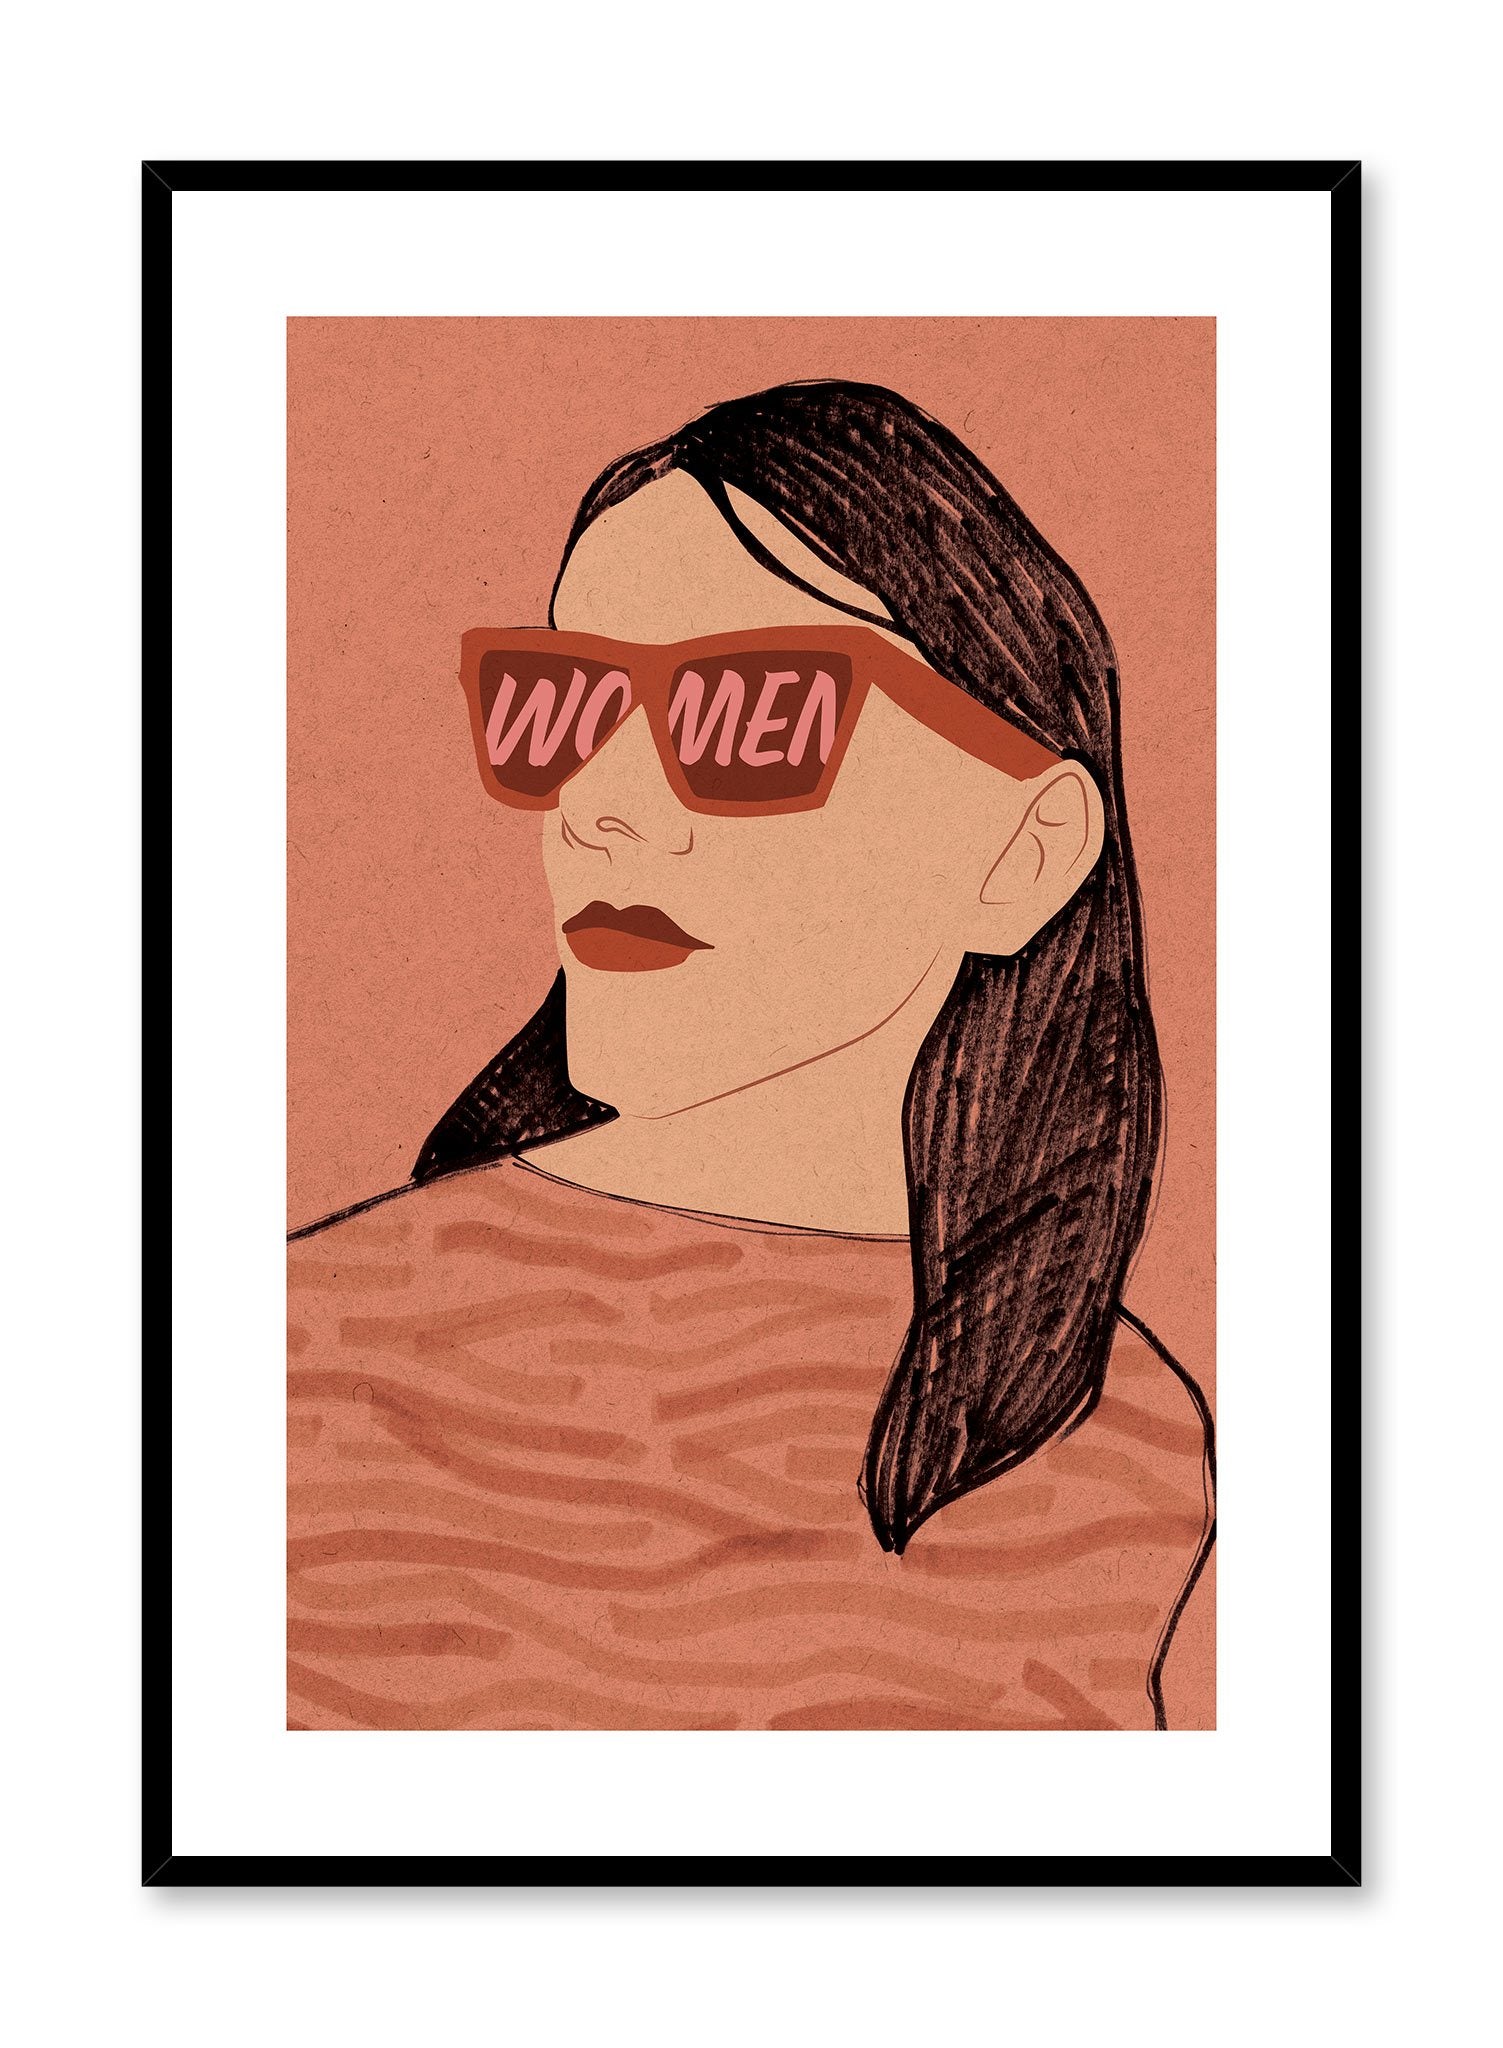 Women on my Mind is a minimalist illustration by Opposite Wall of a woman wearing an orange pair of sunglasses with the word "Women" written in a big font. 